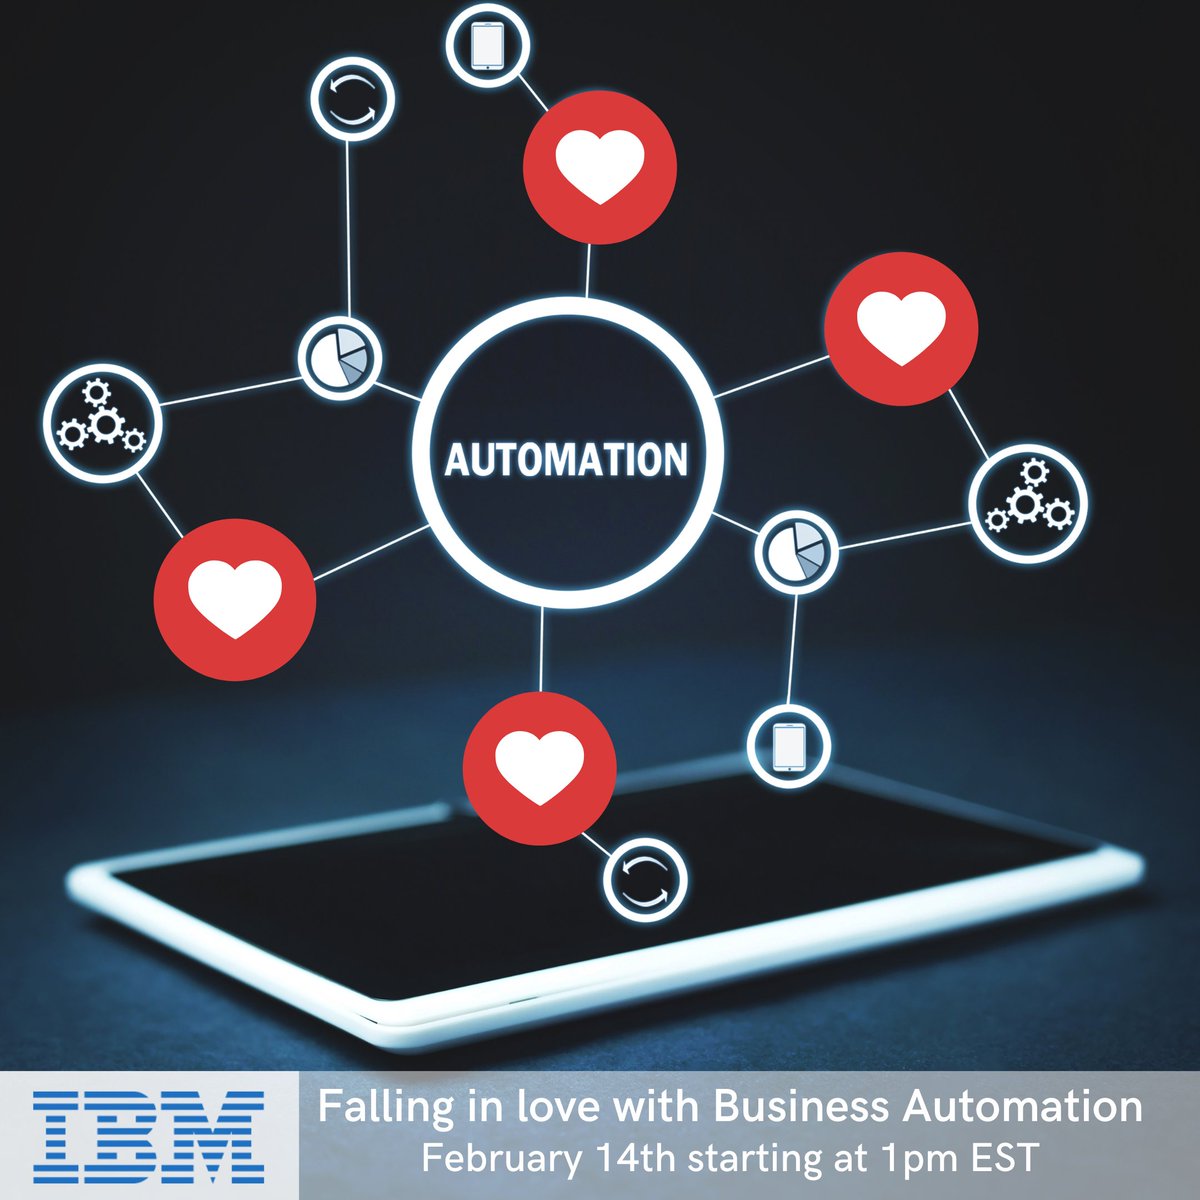 ❤️ Upcoming IBM Webinar ❤️ - Falling In Love with Business Automation Part 1 Register today to see how @IBM is helping clients succeed with Automation and discover some of the best ways to get started. Register here: ibm.biz/BLWSEp1Pt1 #ibm #rpa #automation #decisionmgt